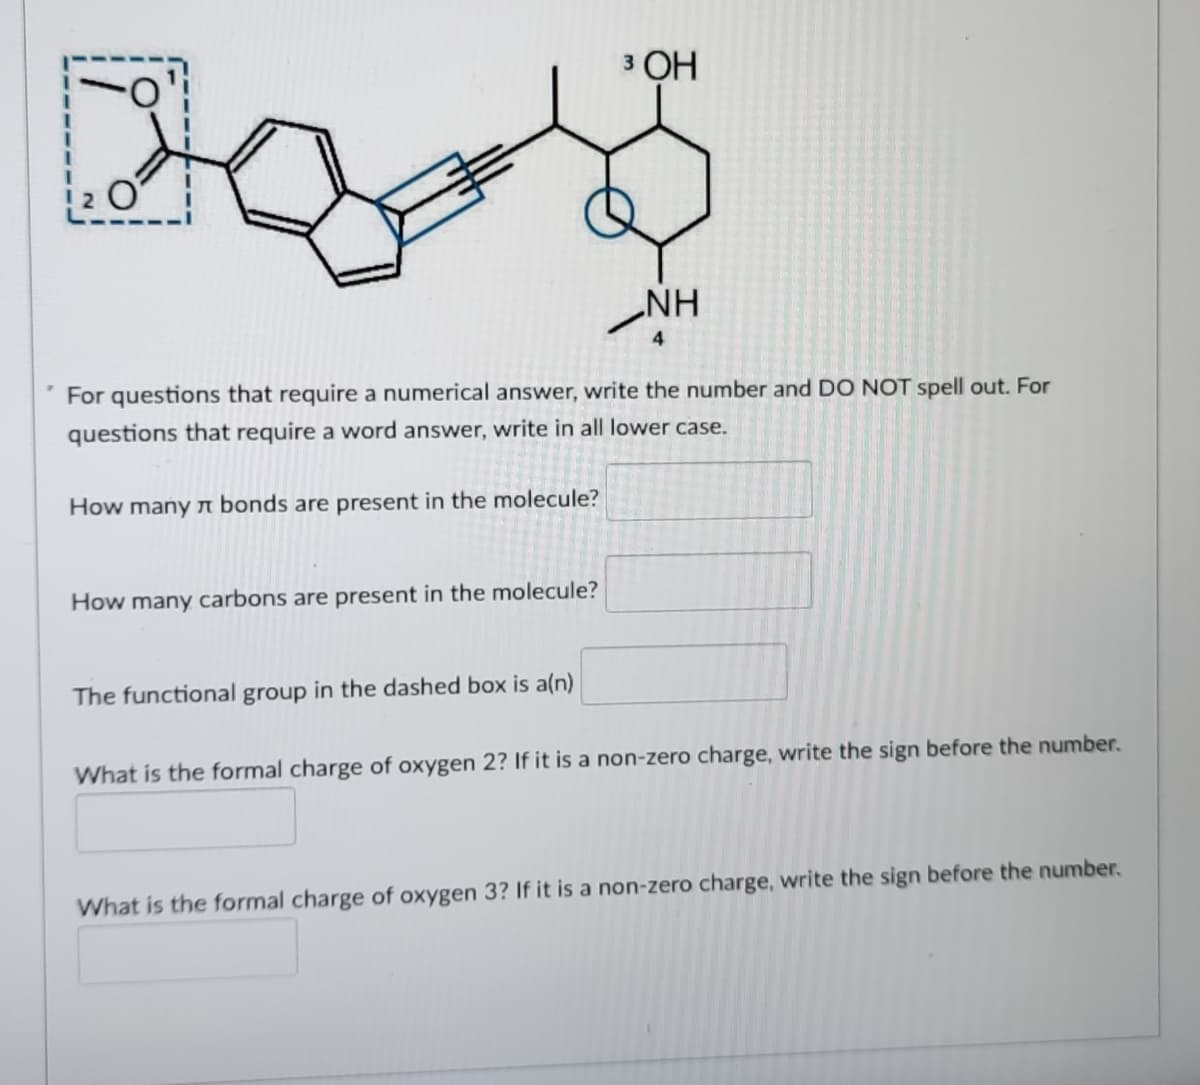 3 ОН
%3D
NH
4
For questions that require a numerical answer, write the number and DO NOT spell out. For
questions that require a word answer, write in all lower case.
How many n bonds are present in the molecule?
How many carbons are present in the molecule?
The functional group in the dashed box is a(n)
What is the formal charge of oxygen 2? If it is a non-zero charge, write the sign before the number.
What is the formal charge of oxygen 3? If it is a non-zero charge, write the sign before the number.
